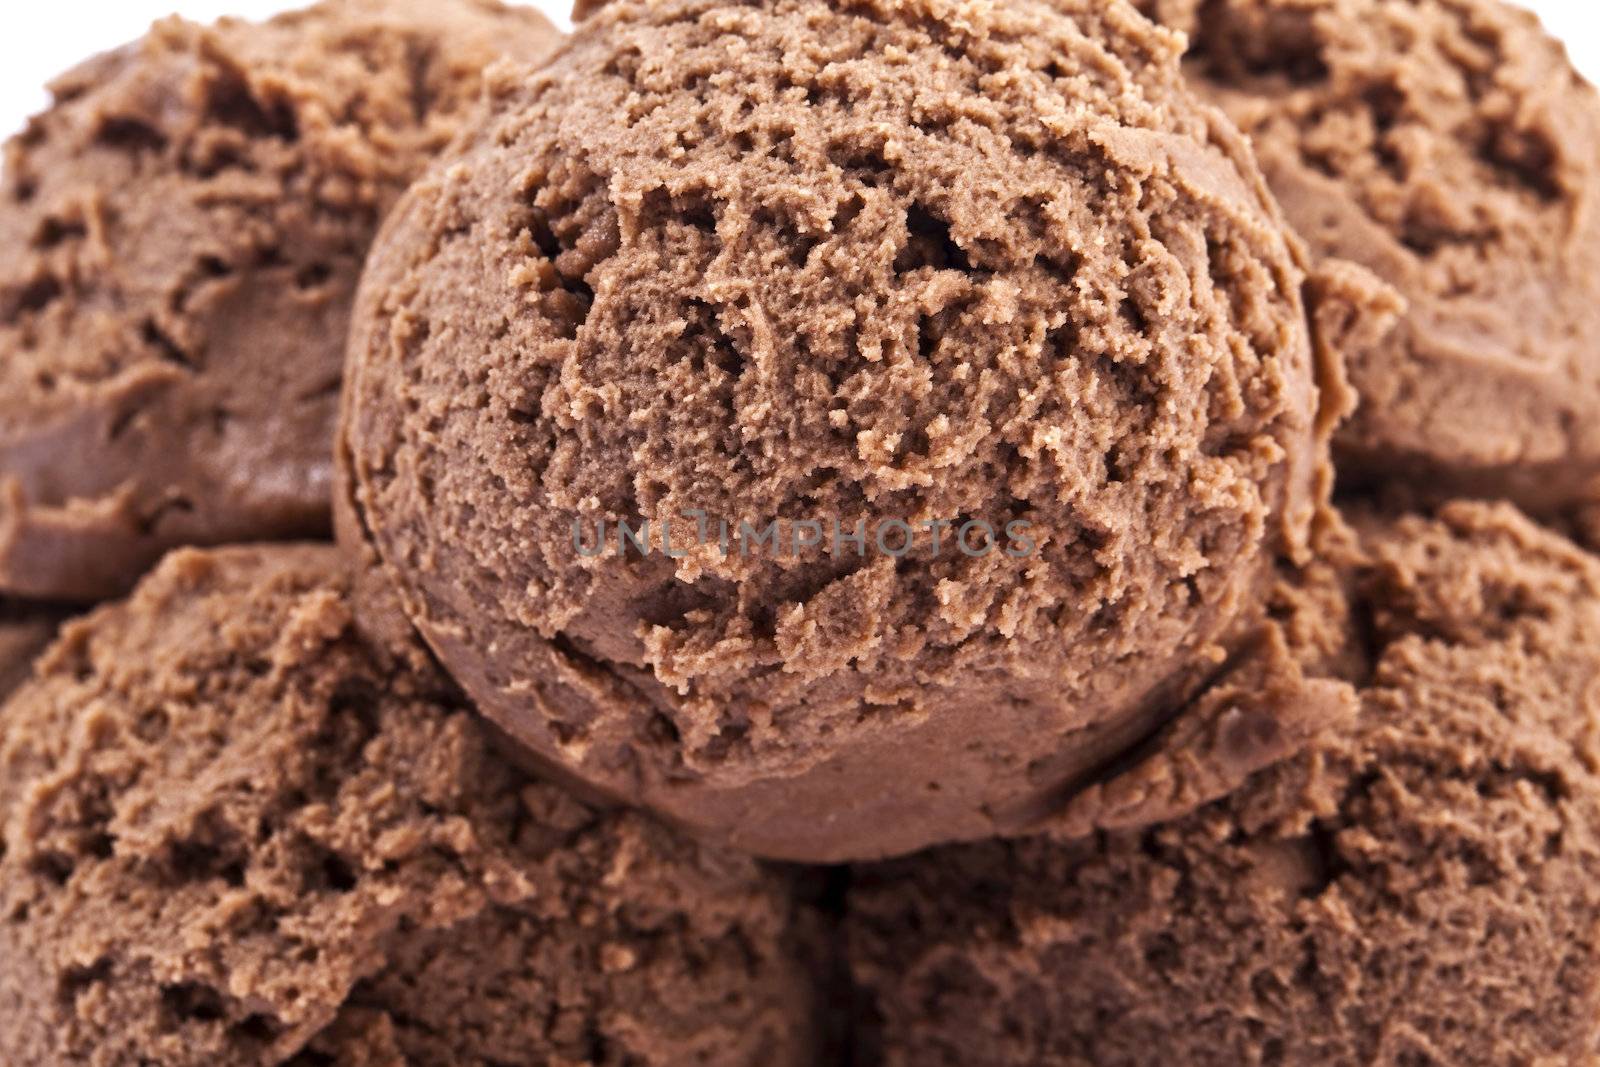 Closed up shot of chocolate ice cream scoops